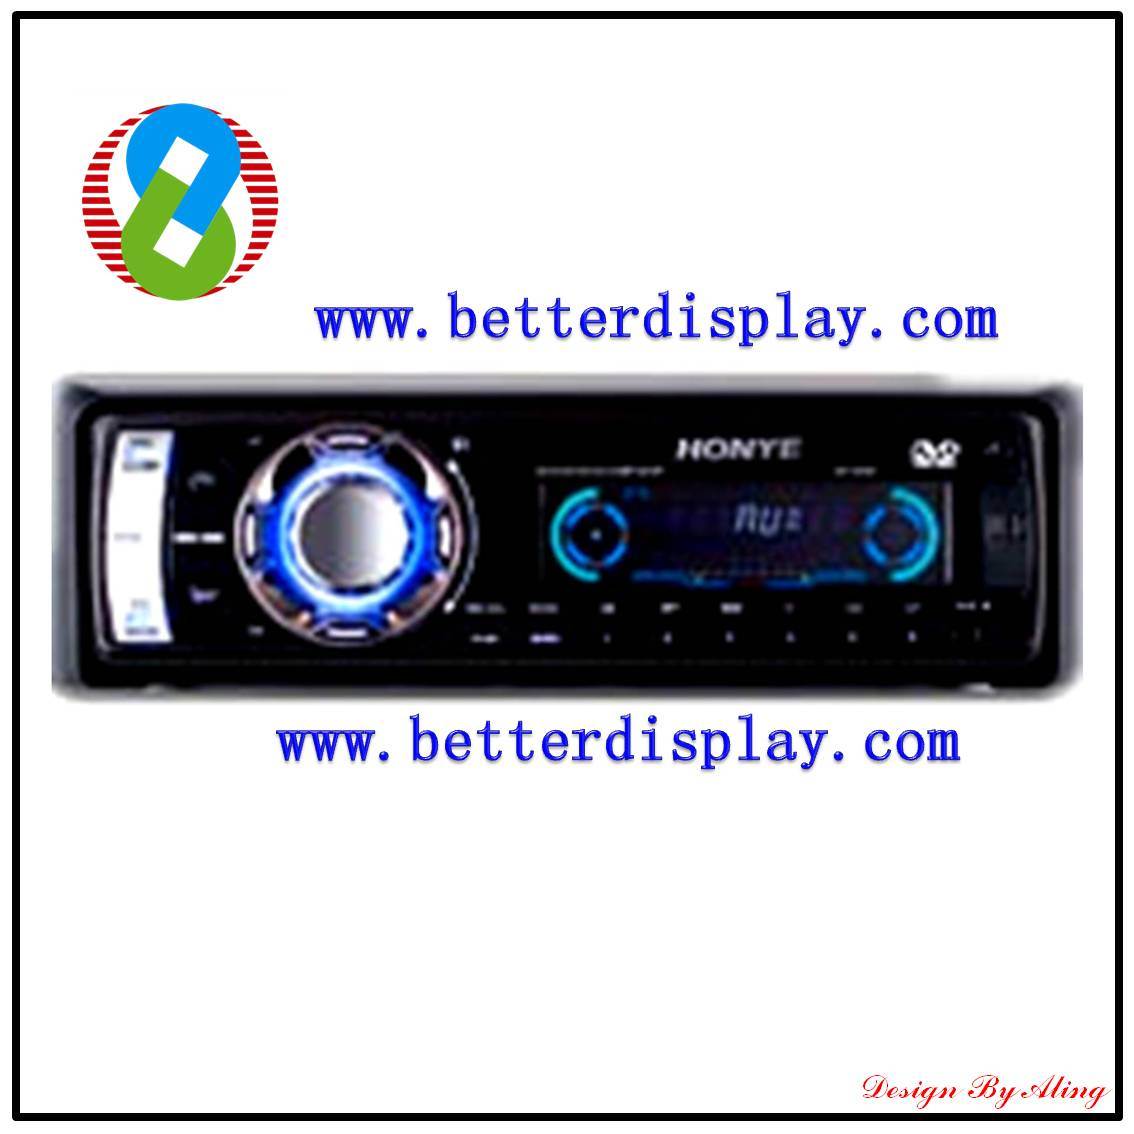 Better LCD Screen Stn Customized Car Video LCD Display